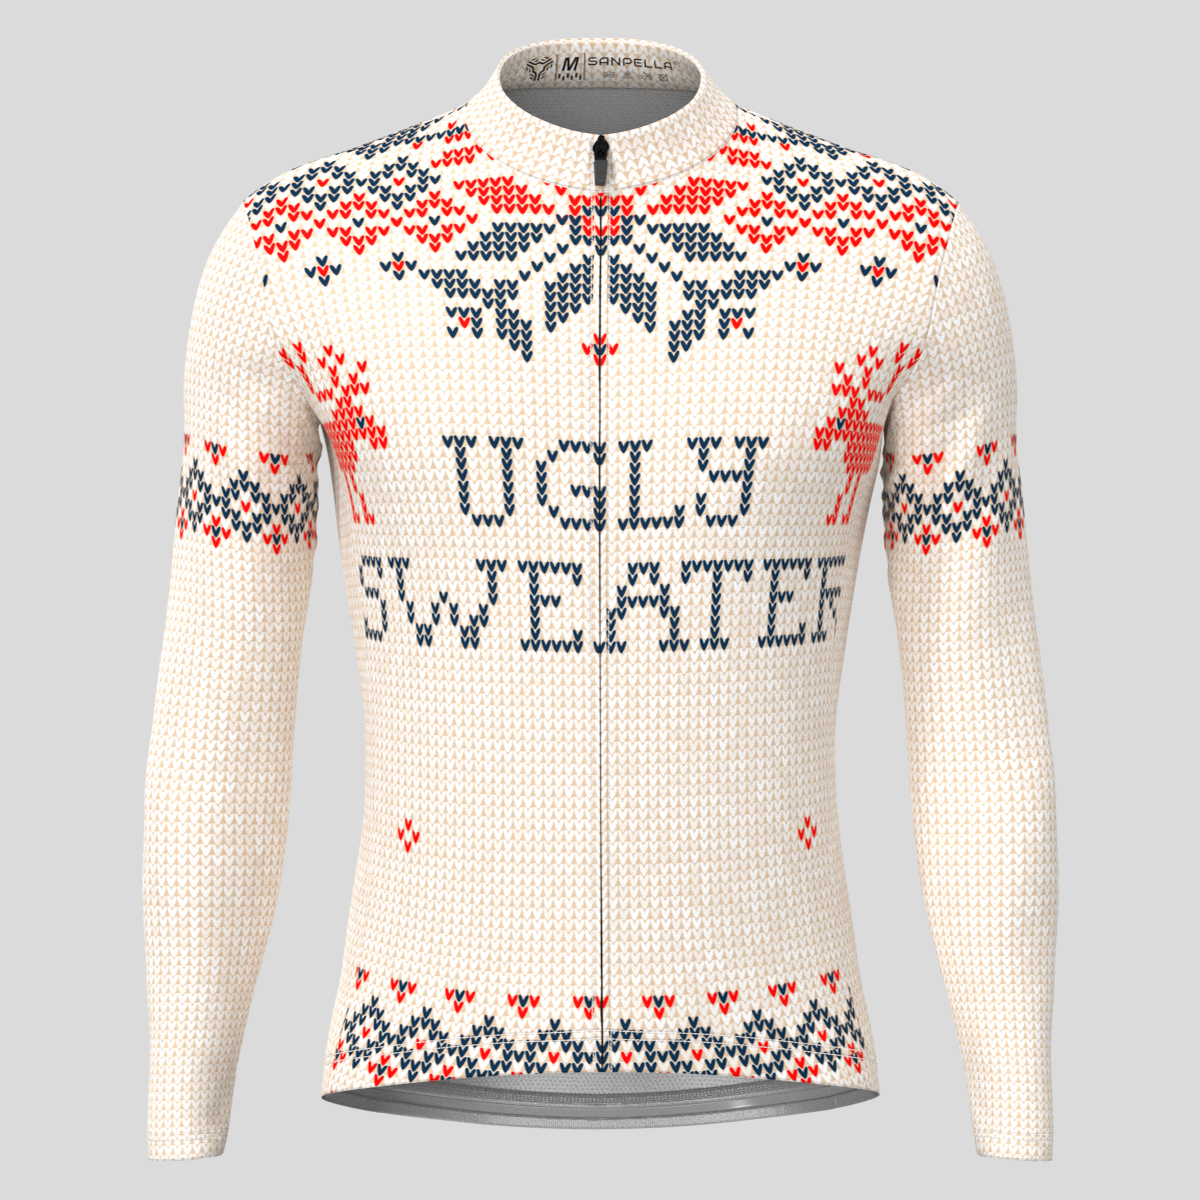 XMAS Ugly Sweater Themed Men's LS Cycling Jersey - Beige